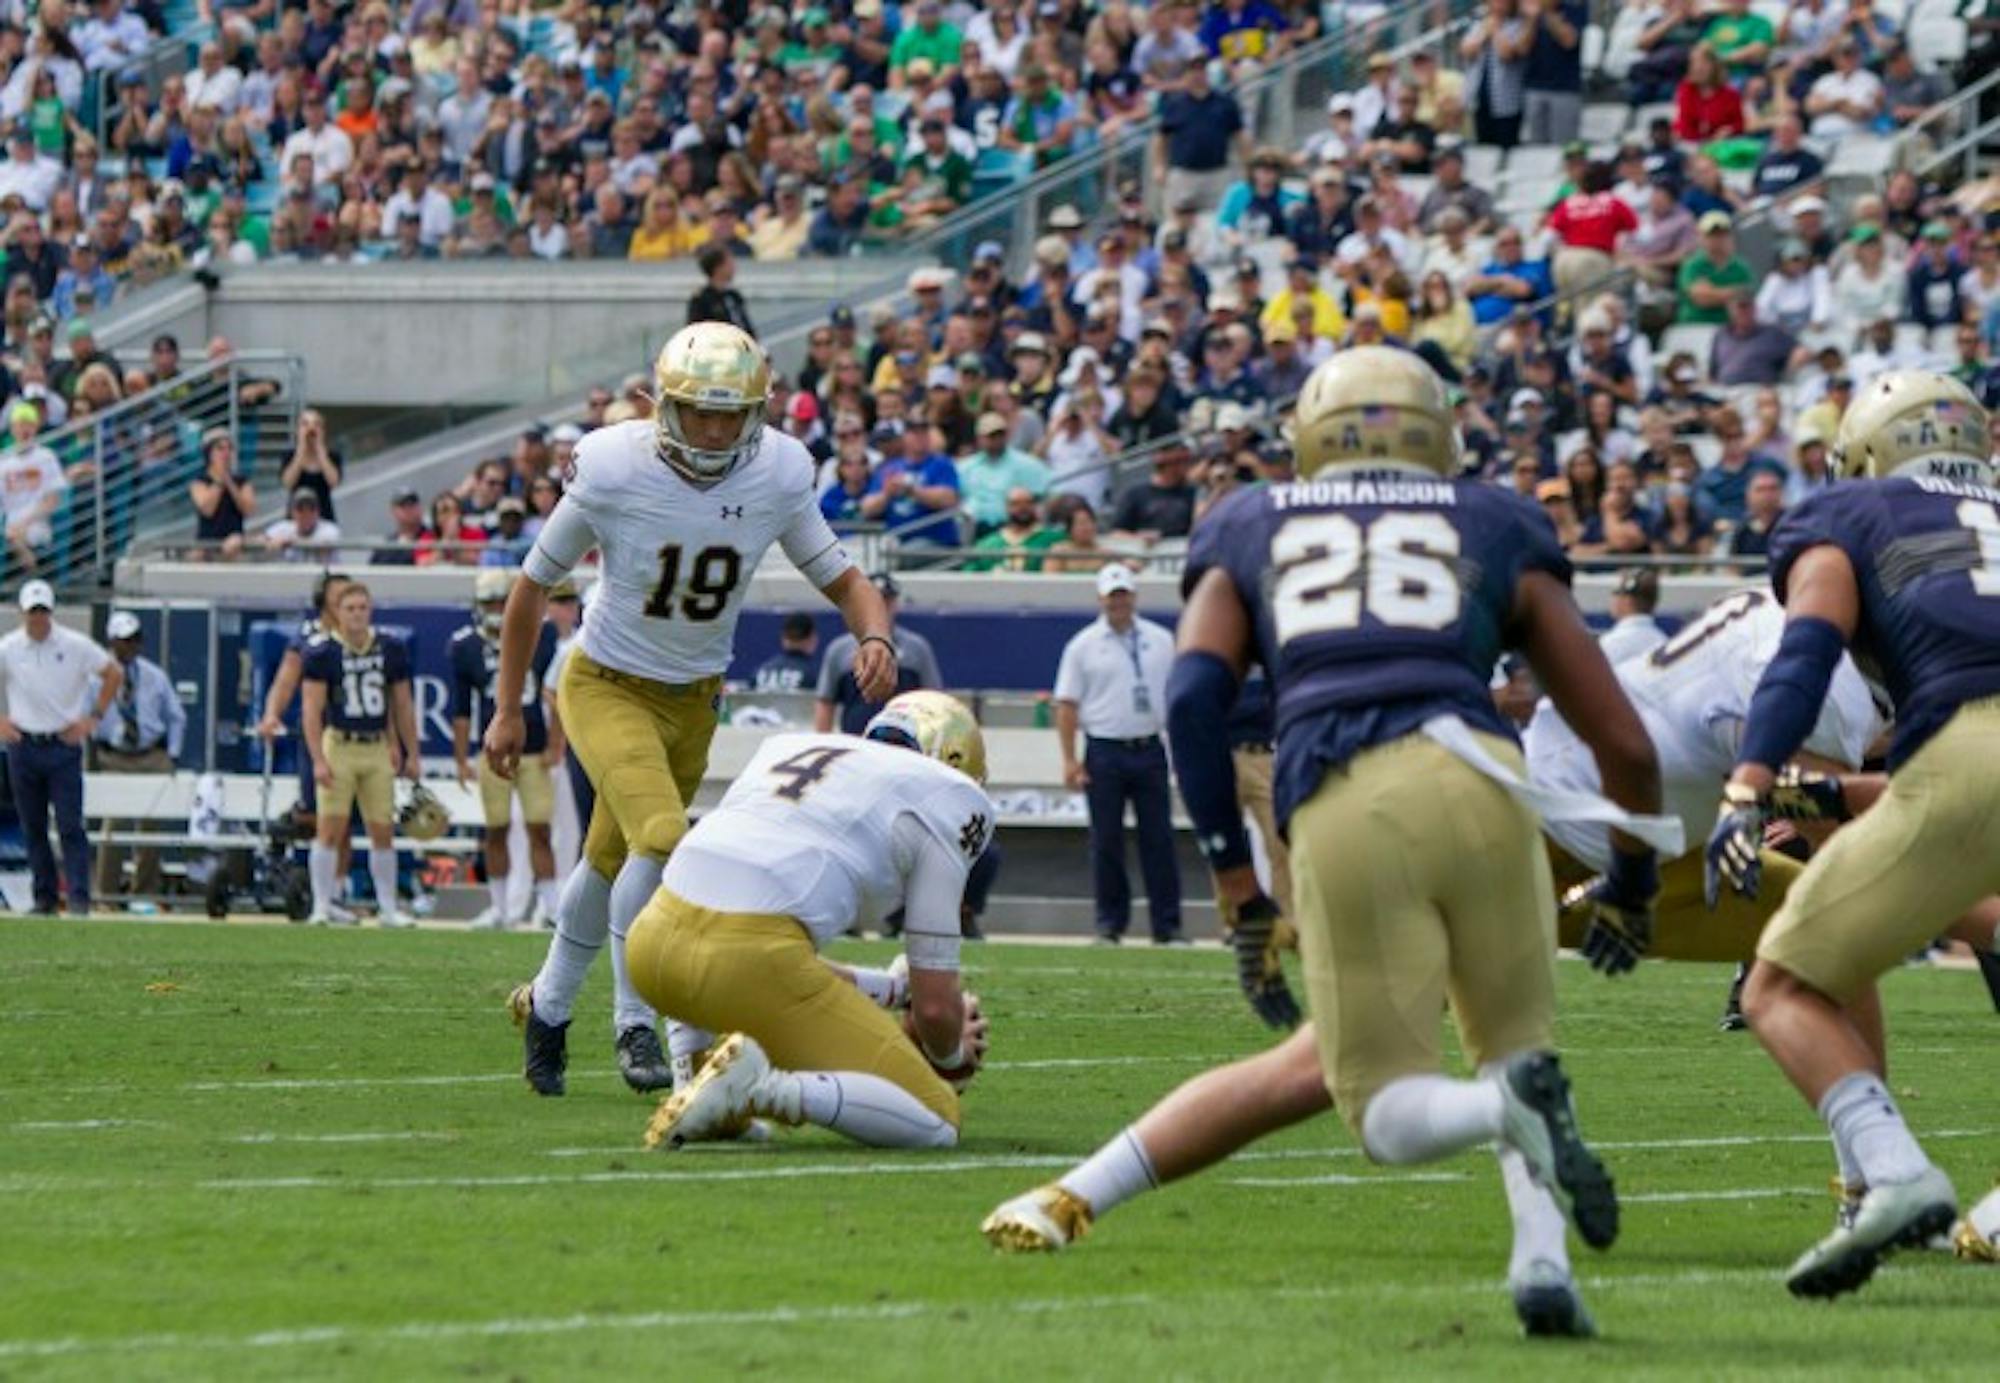 Irish sophomore Justin Yoon lines up a 31-yard field goal in the fourth quarter of Notre Dame's 28-27 loss to Navy on Saturday in Jacksonville. The field goal marked the last possession for Notre Dame.